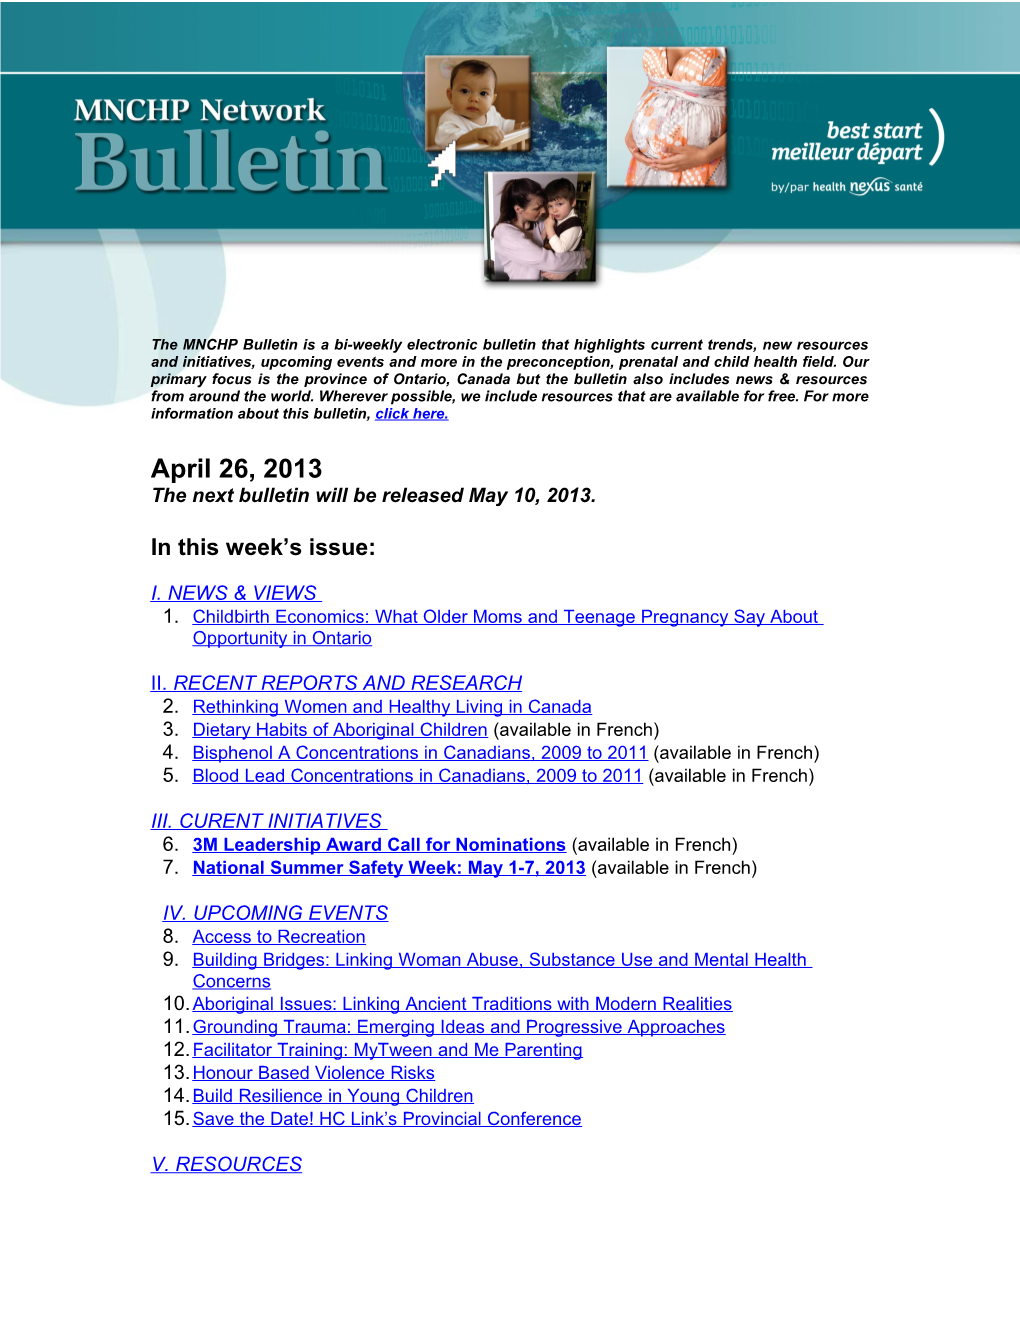 The Next Bulletin Will Be Released May 10, 2013